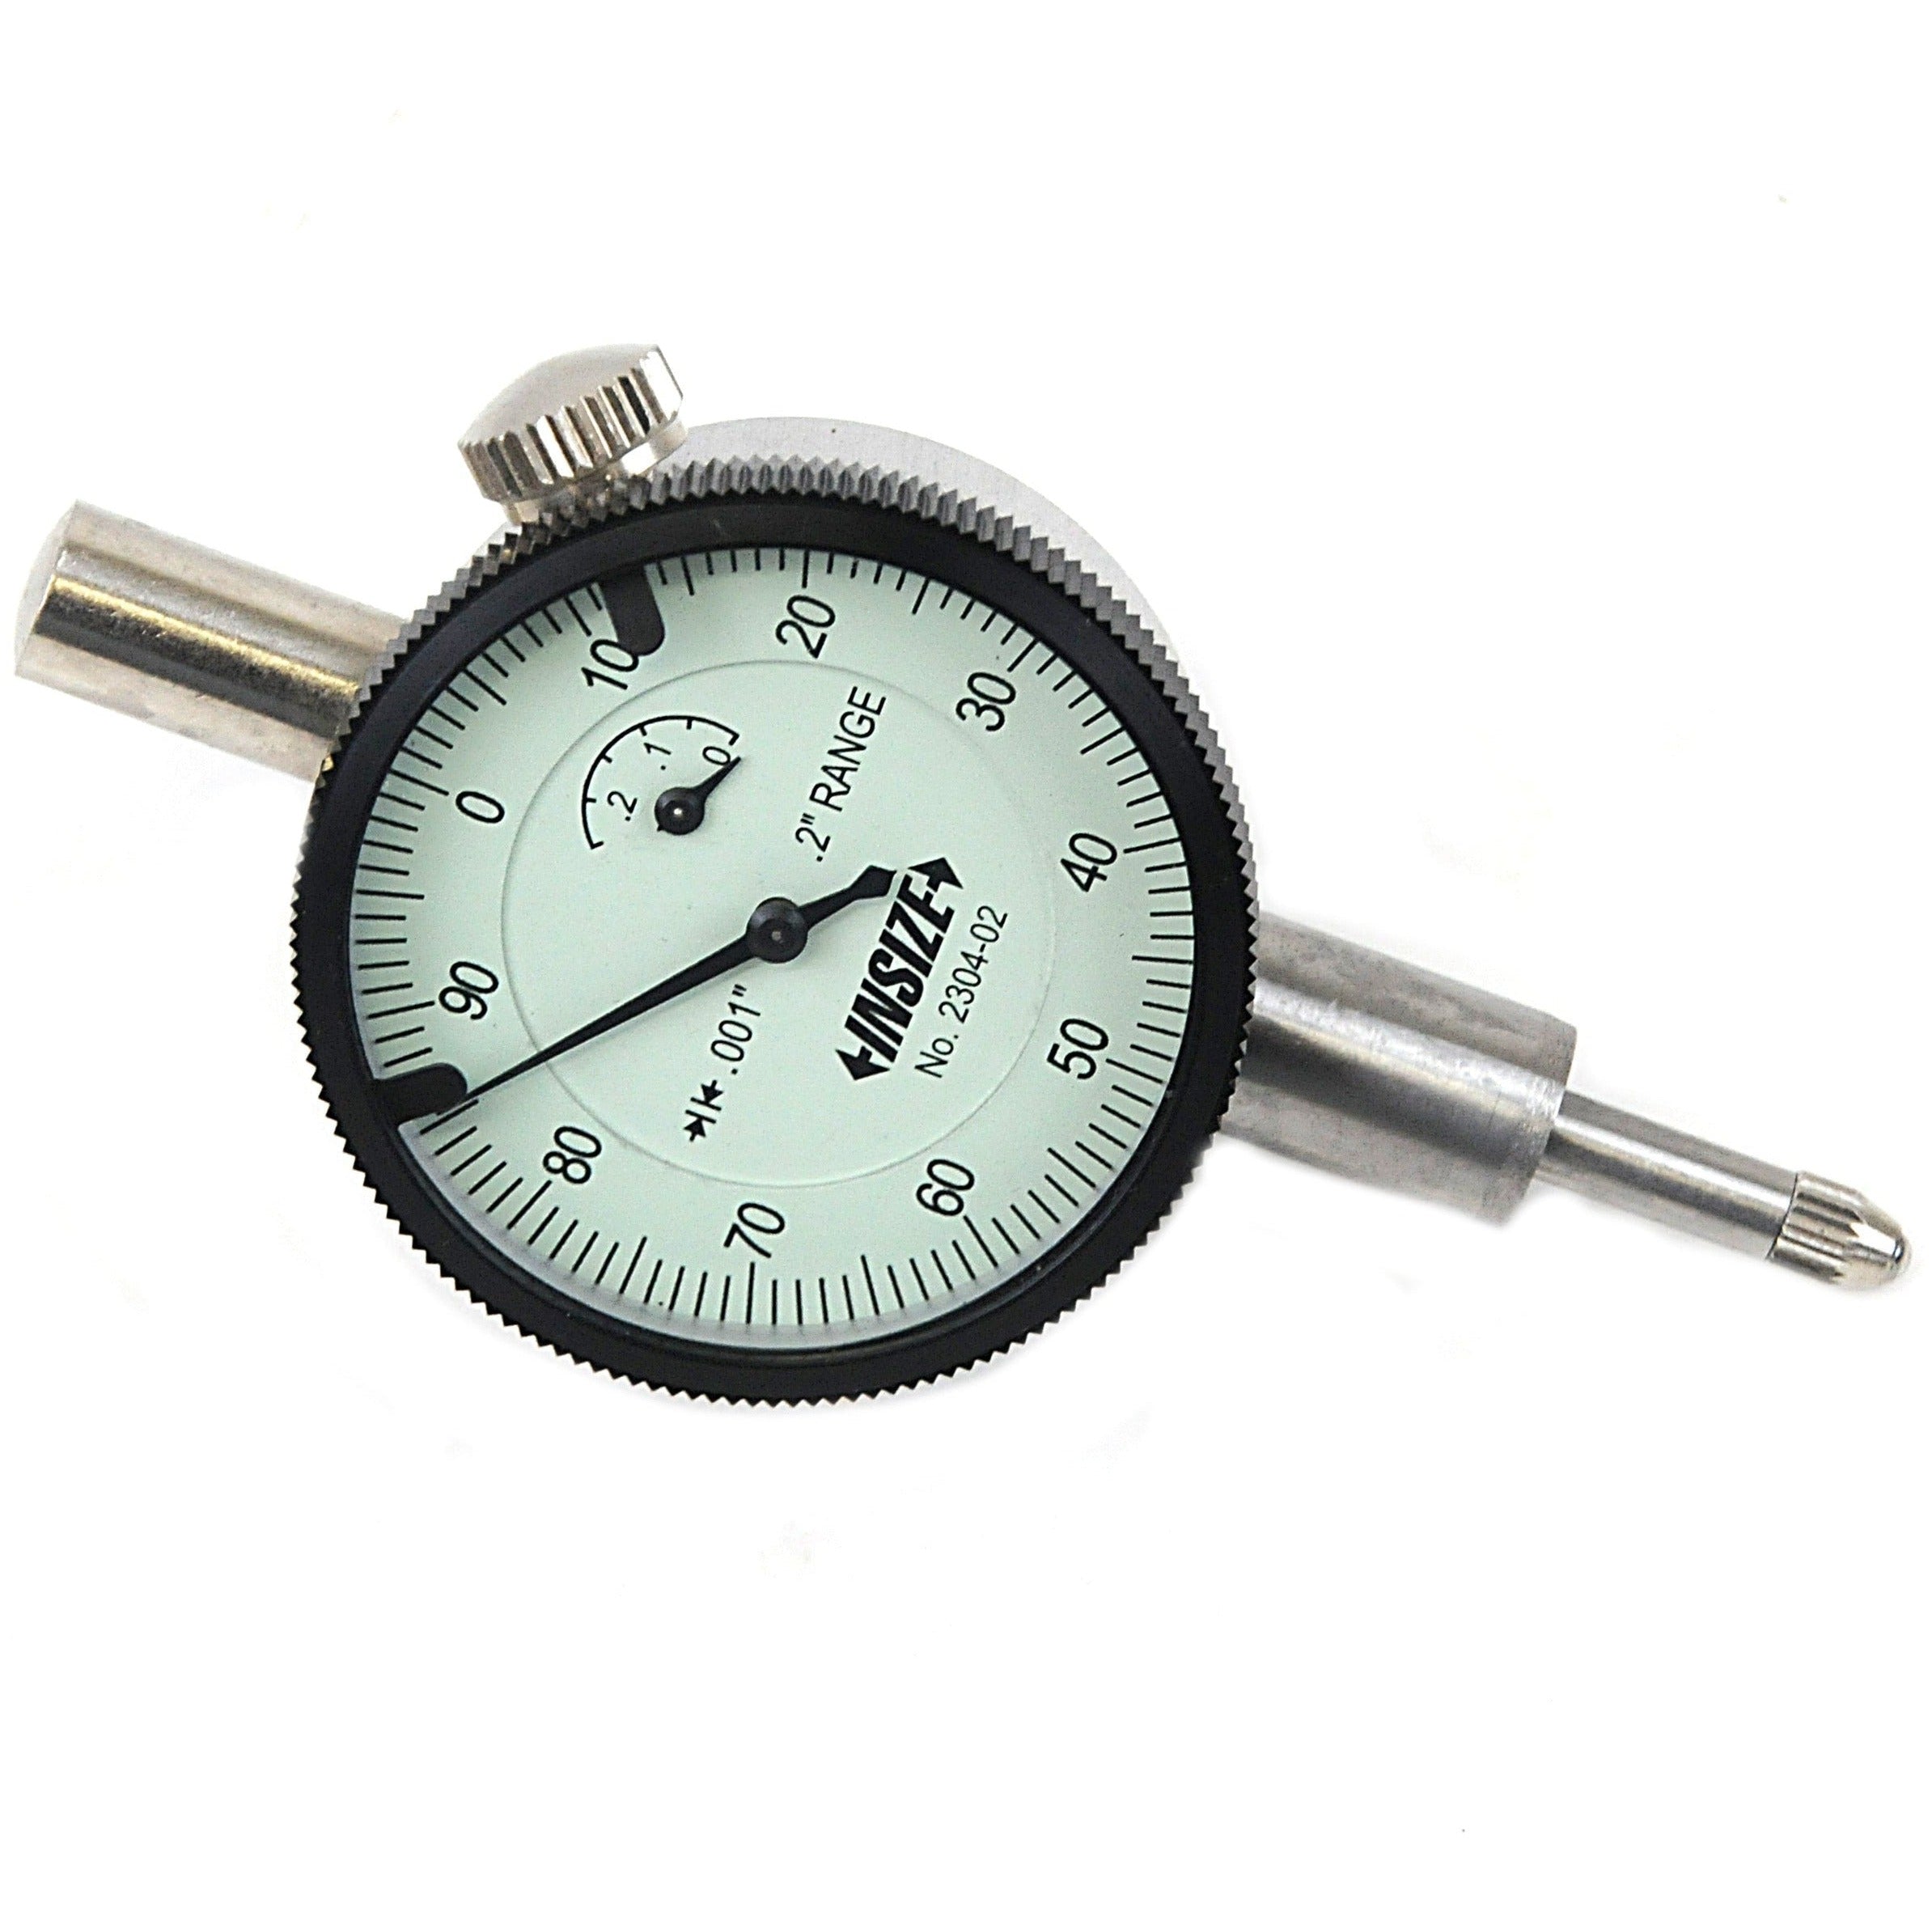 Insize Imperial Compact Dial Indicator Range 0 - 0.5" 2304-02